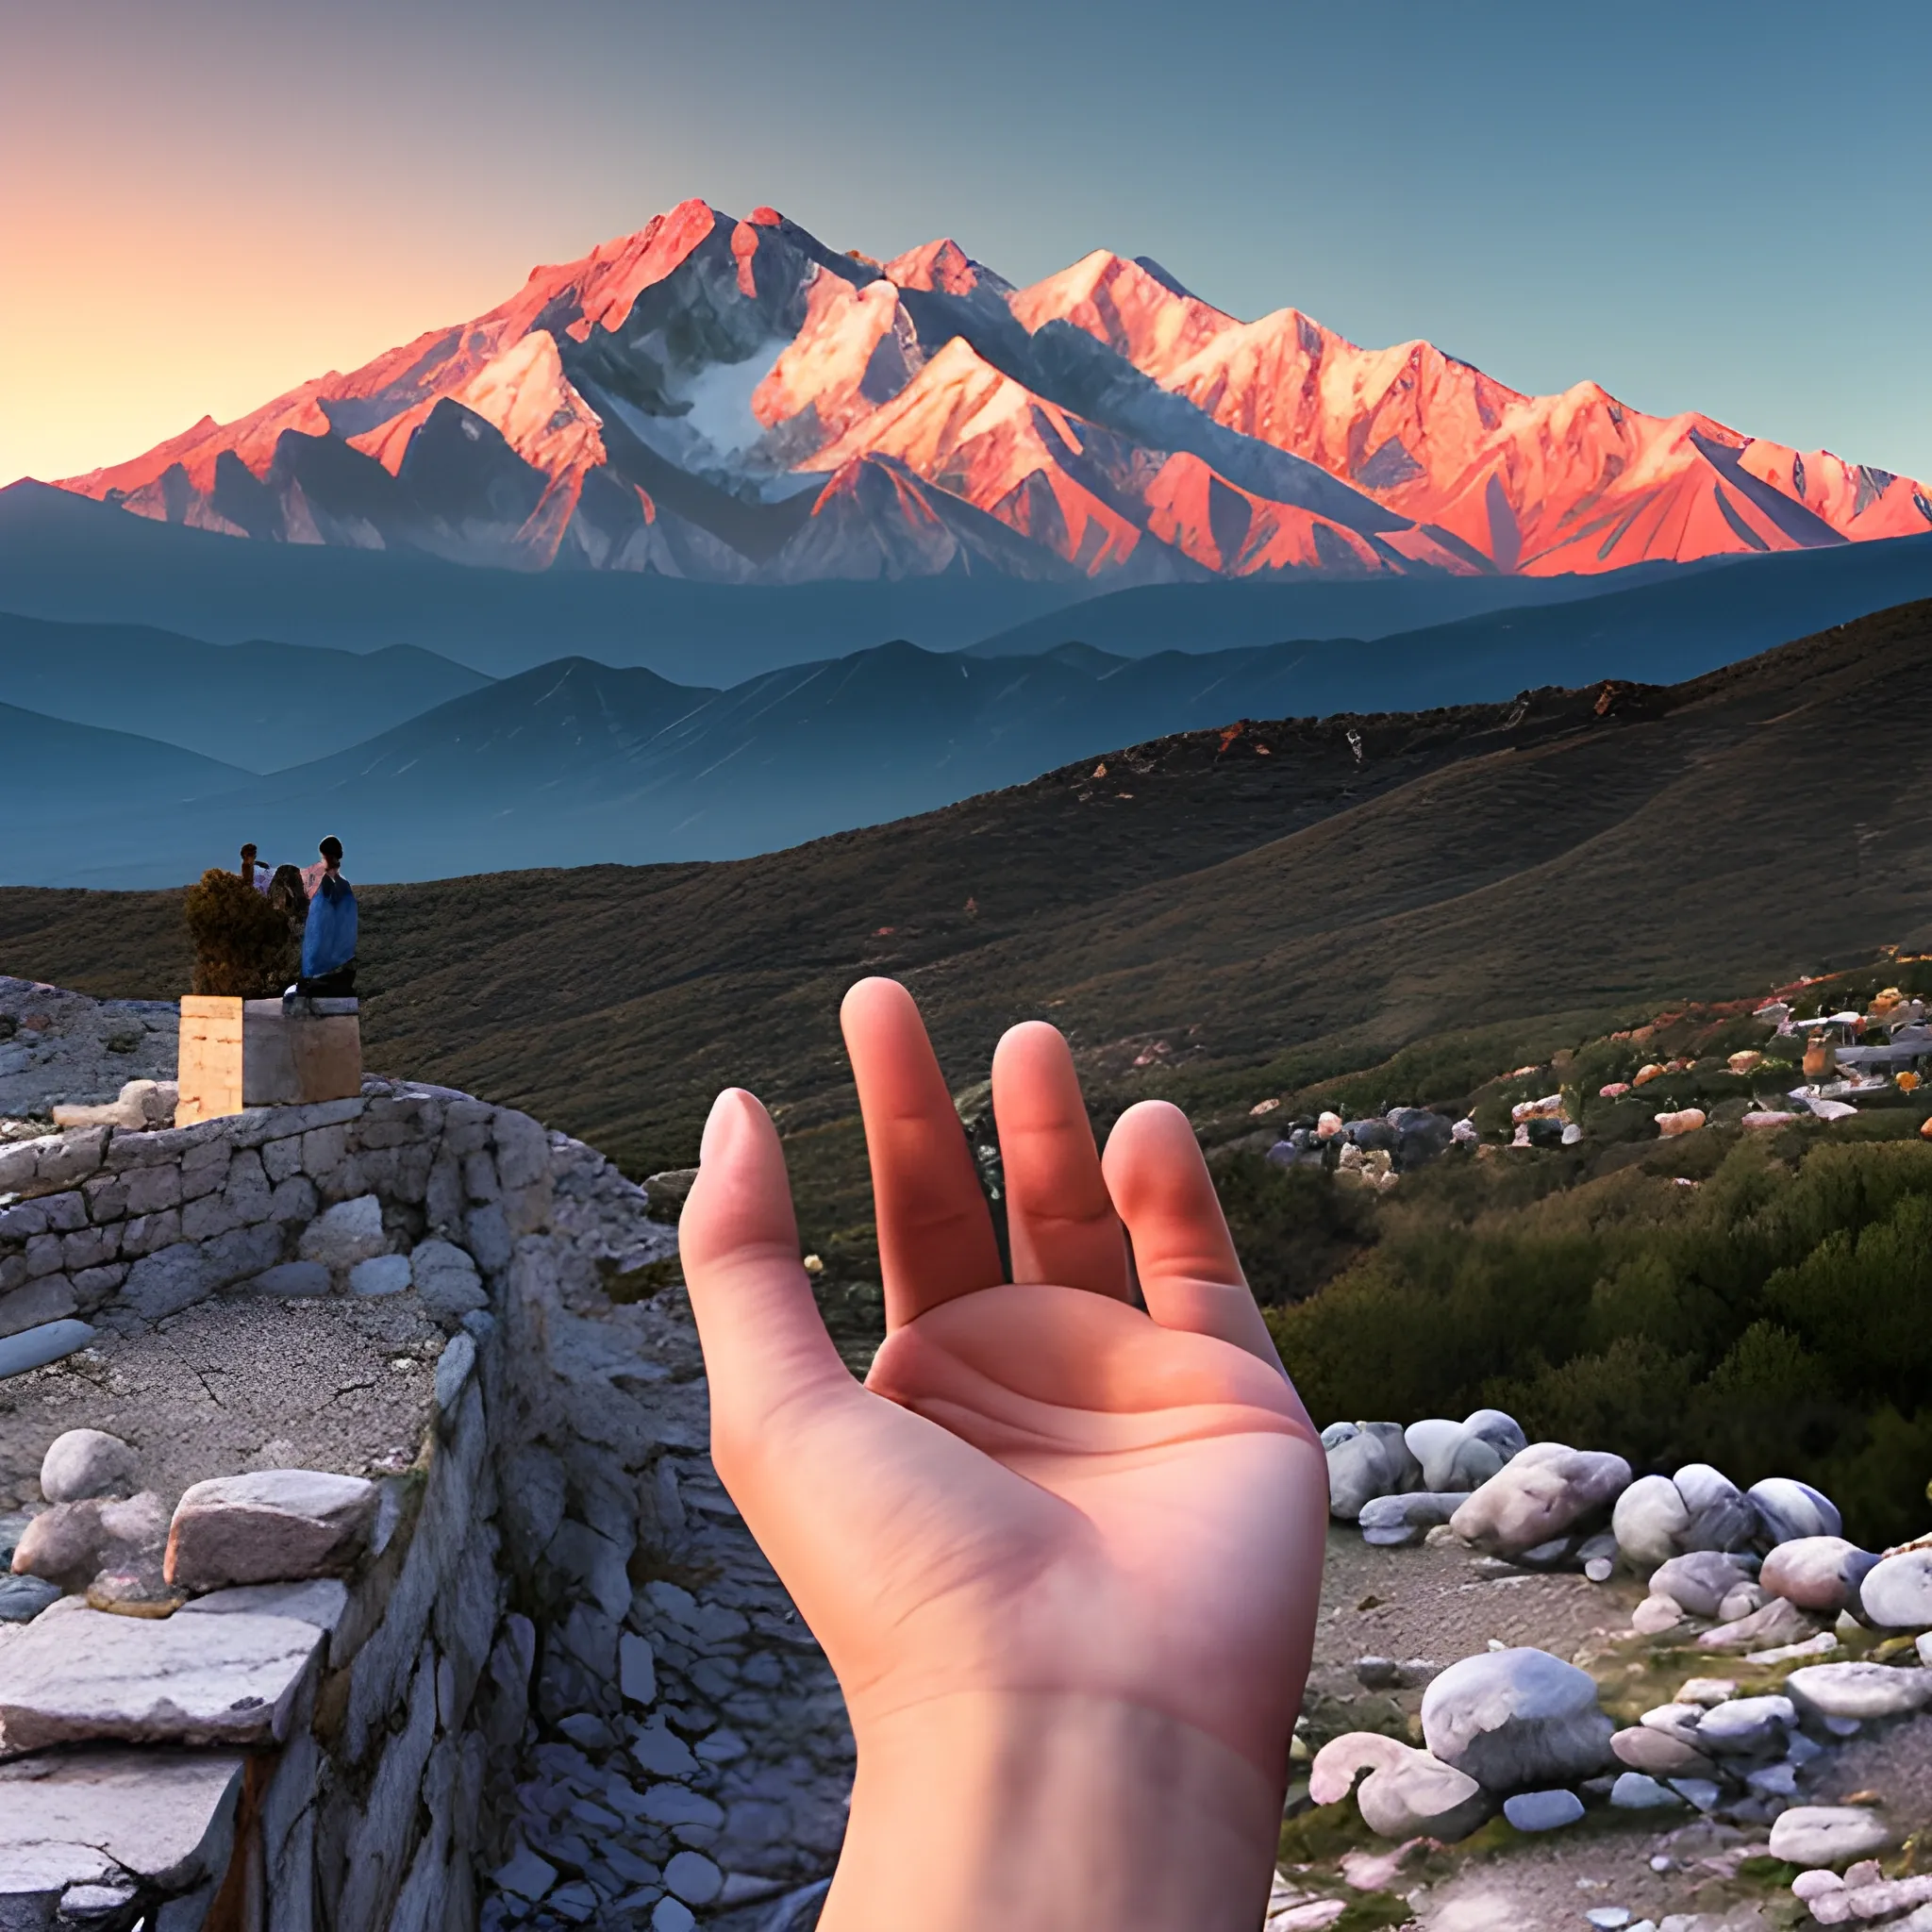 Generate an fantsay image where we see a midaged woman overlooking over the mount canigou, with her hand showing that her future is in het hands. Evening light.

